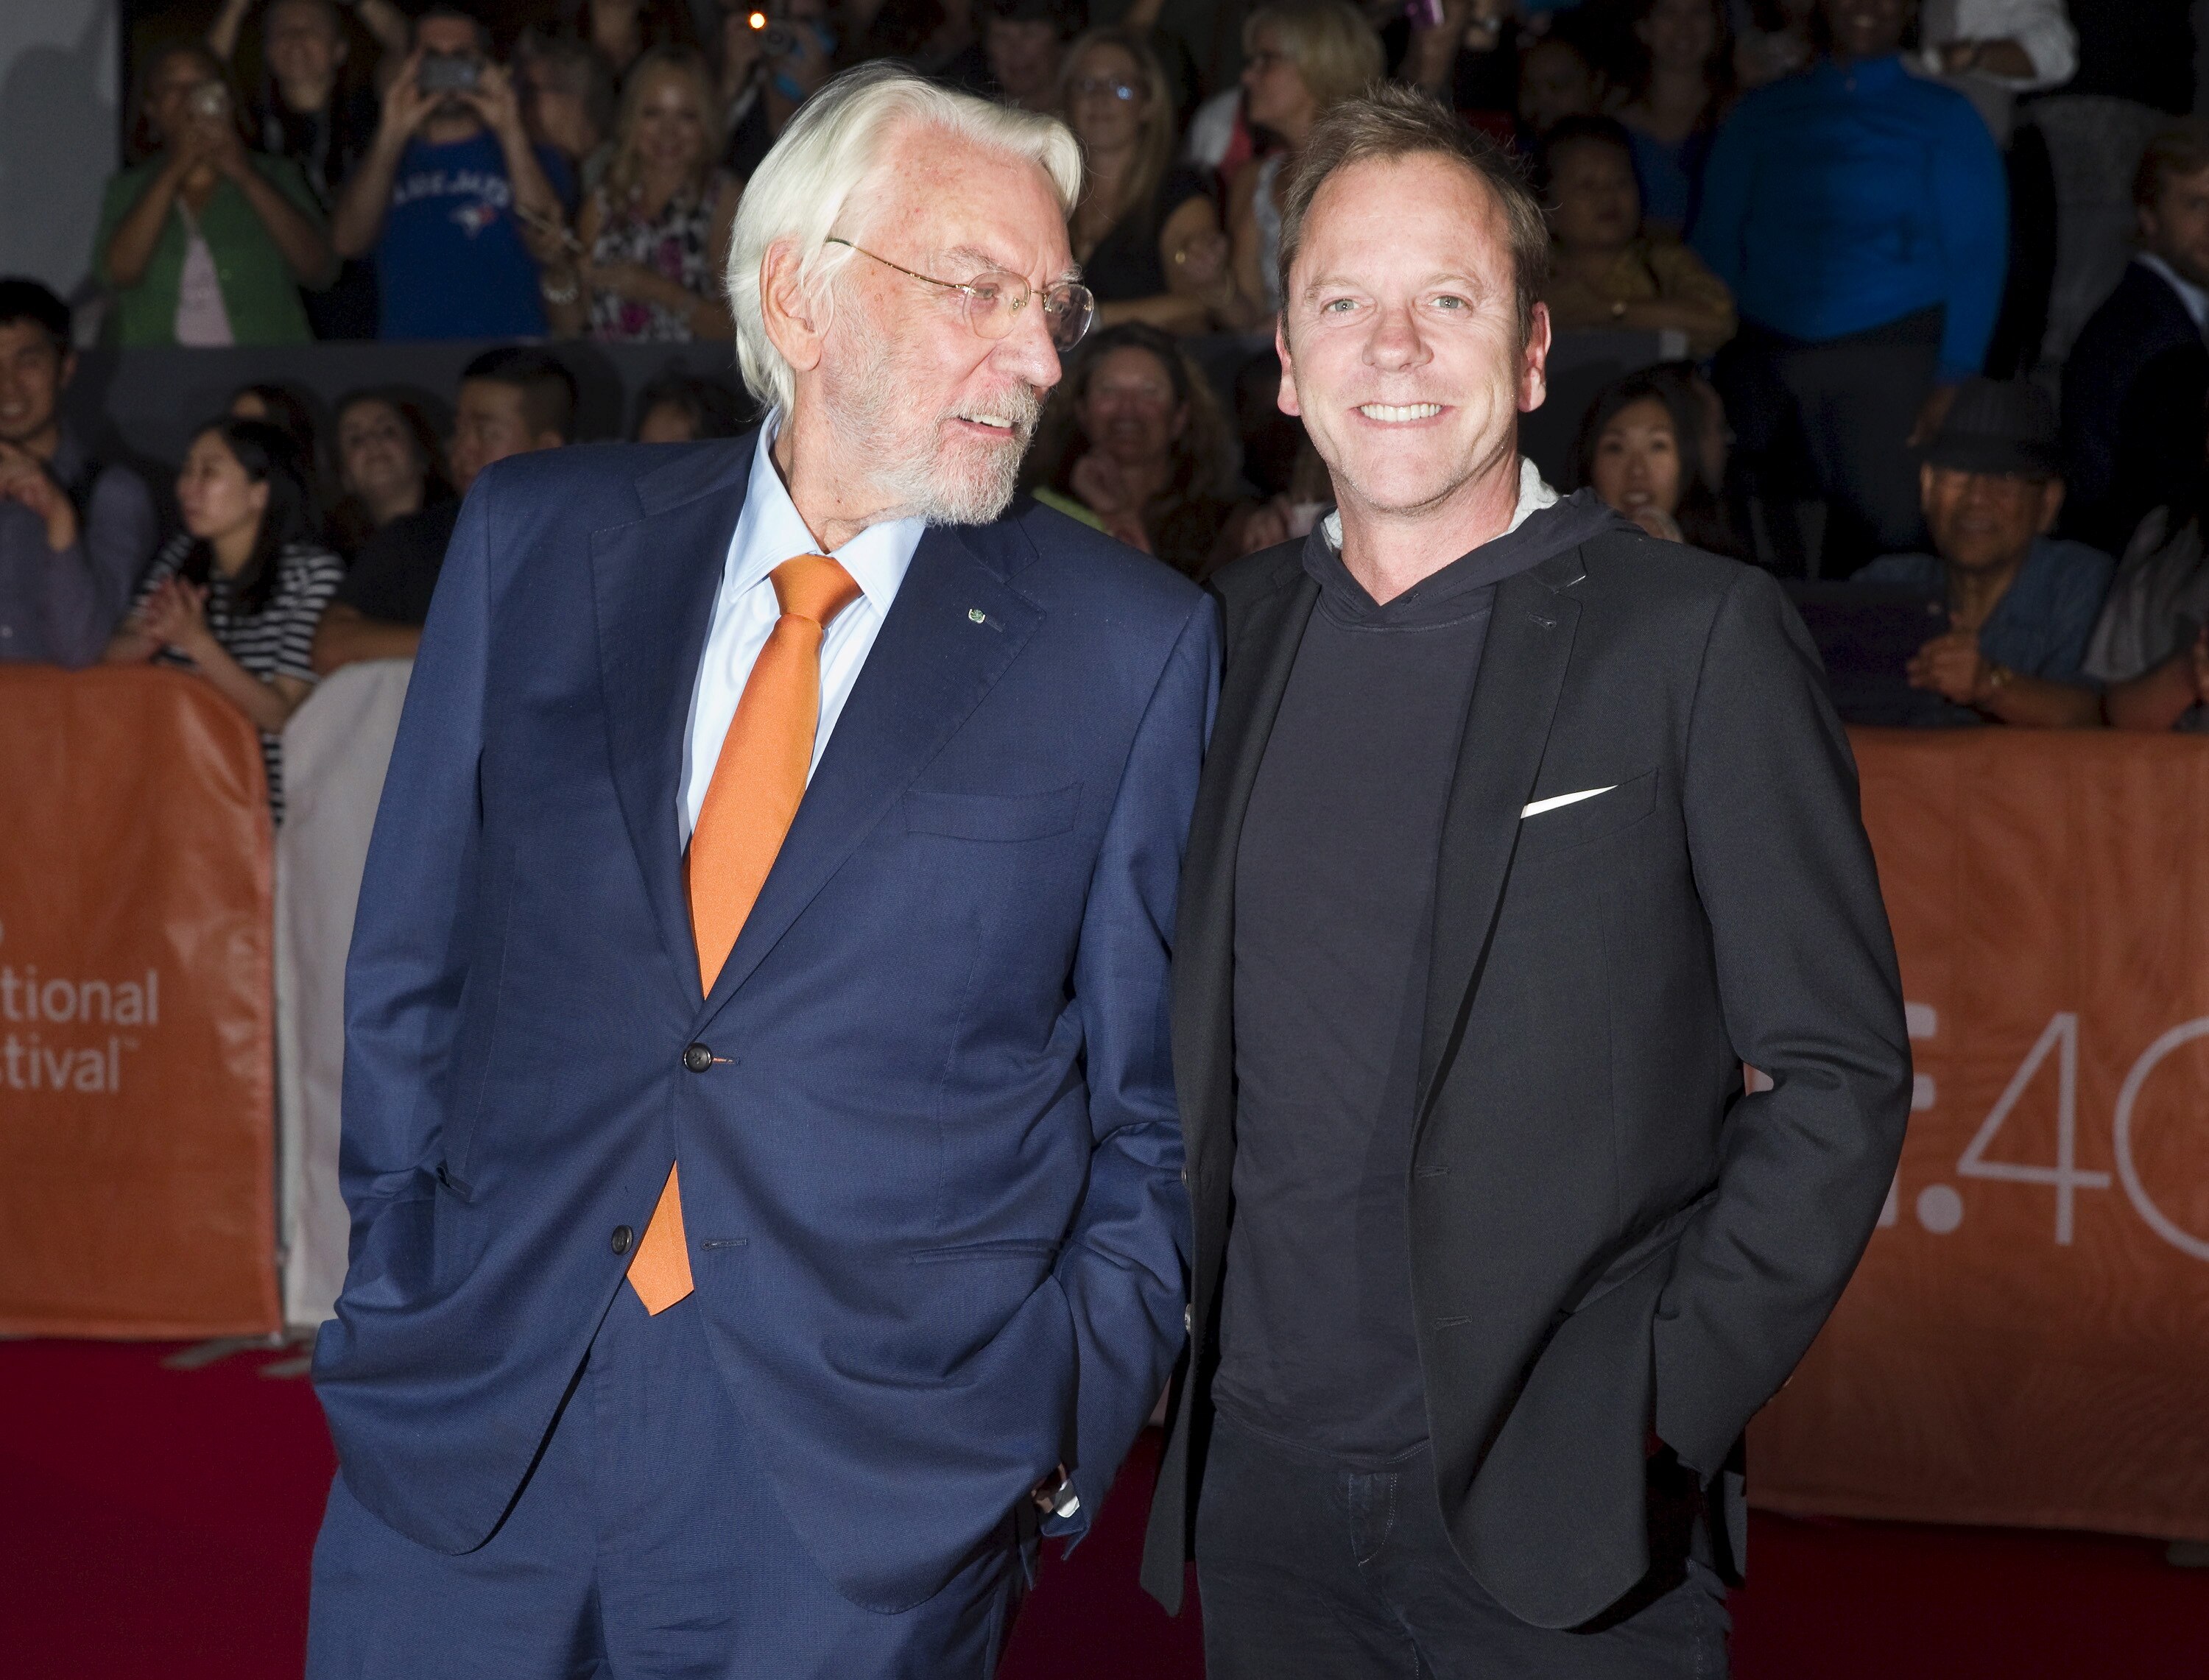 Donald and Kiefer Sutherland at a premiere for their movie Forsaken